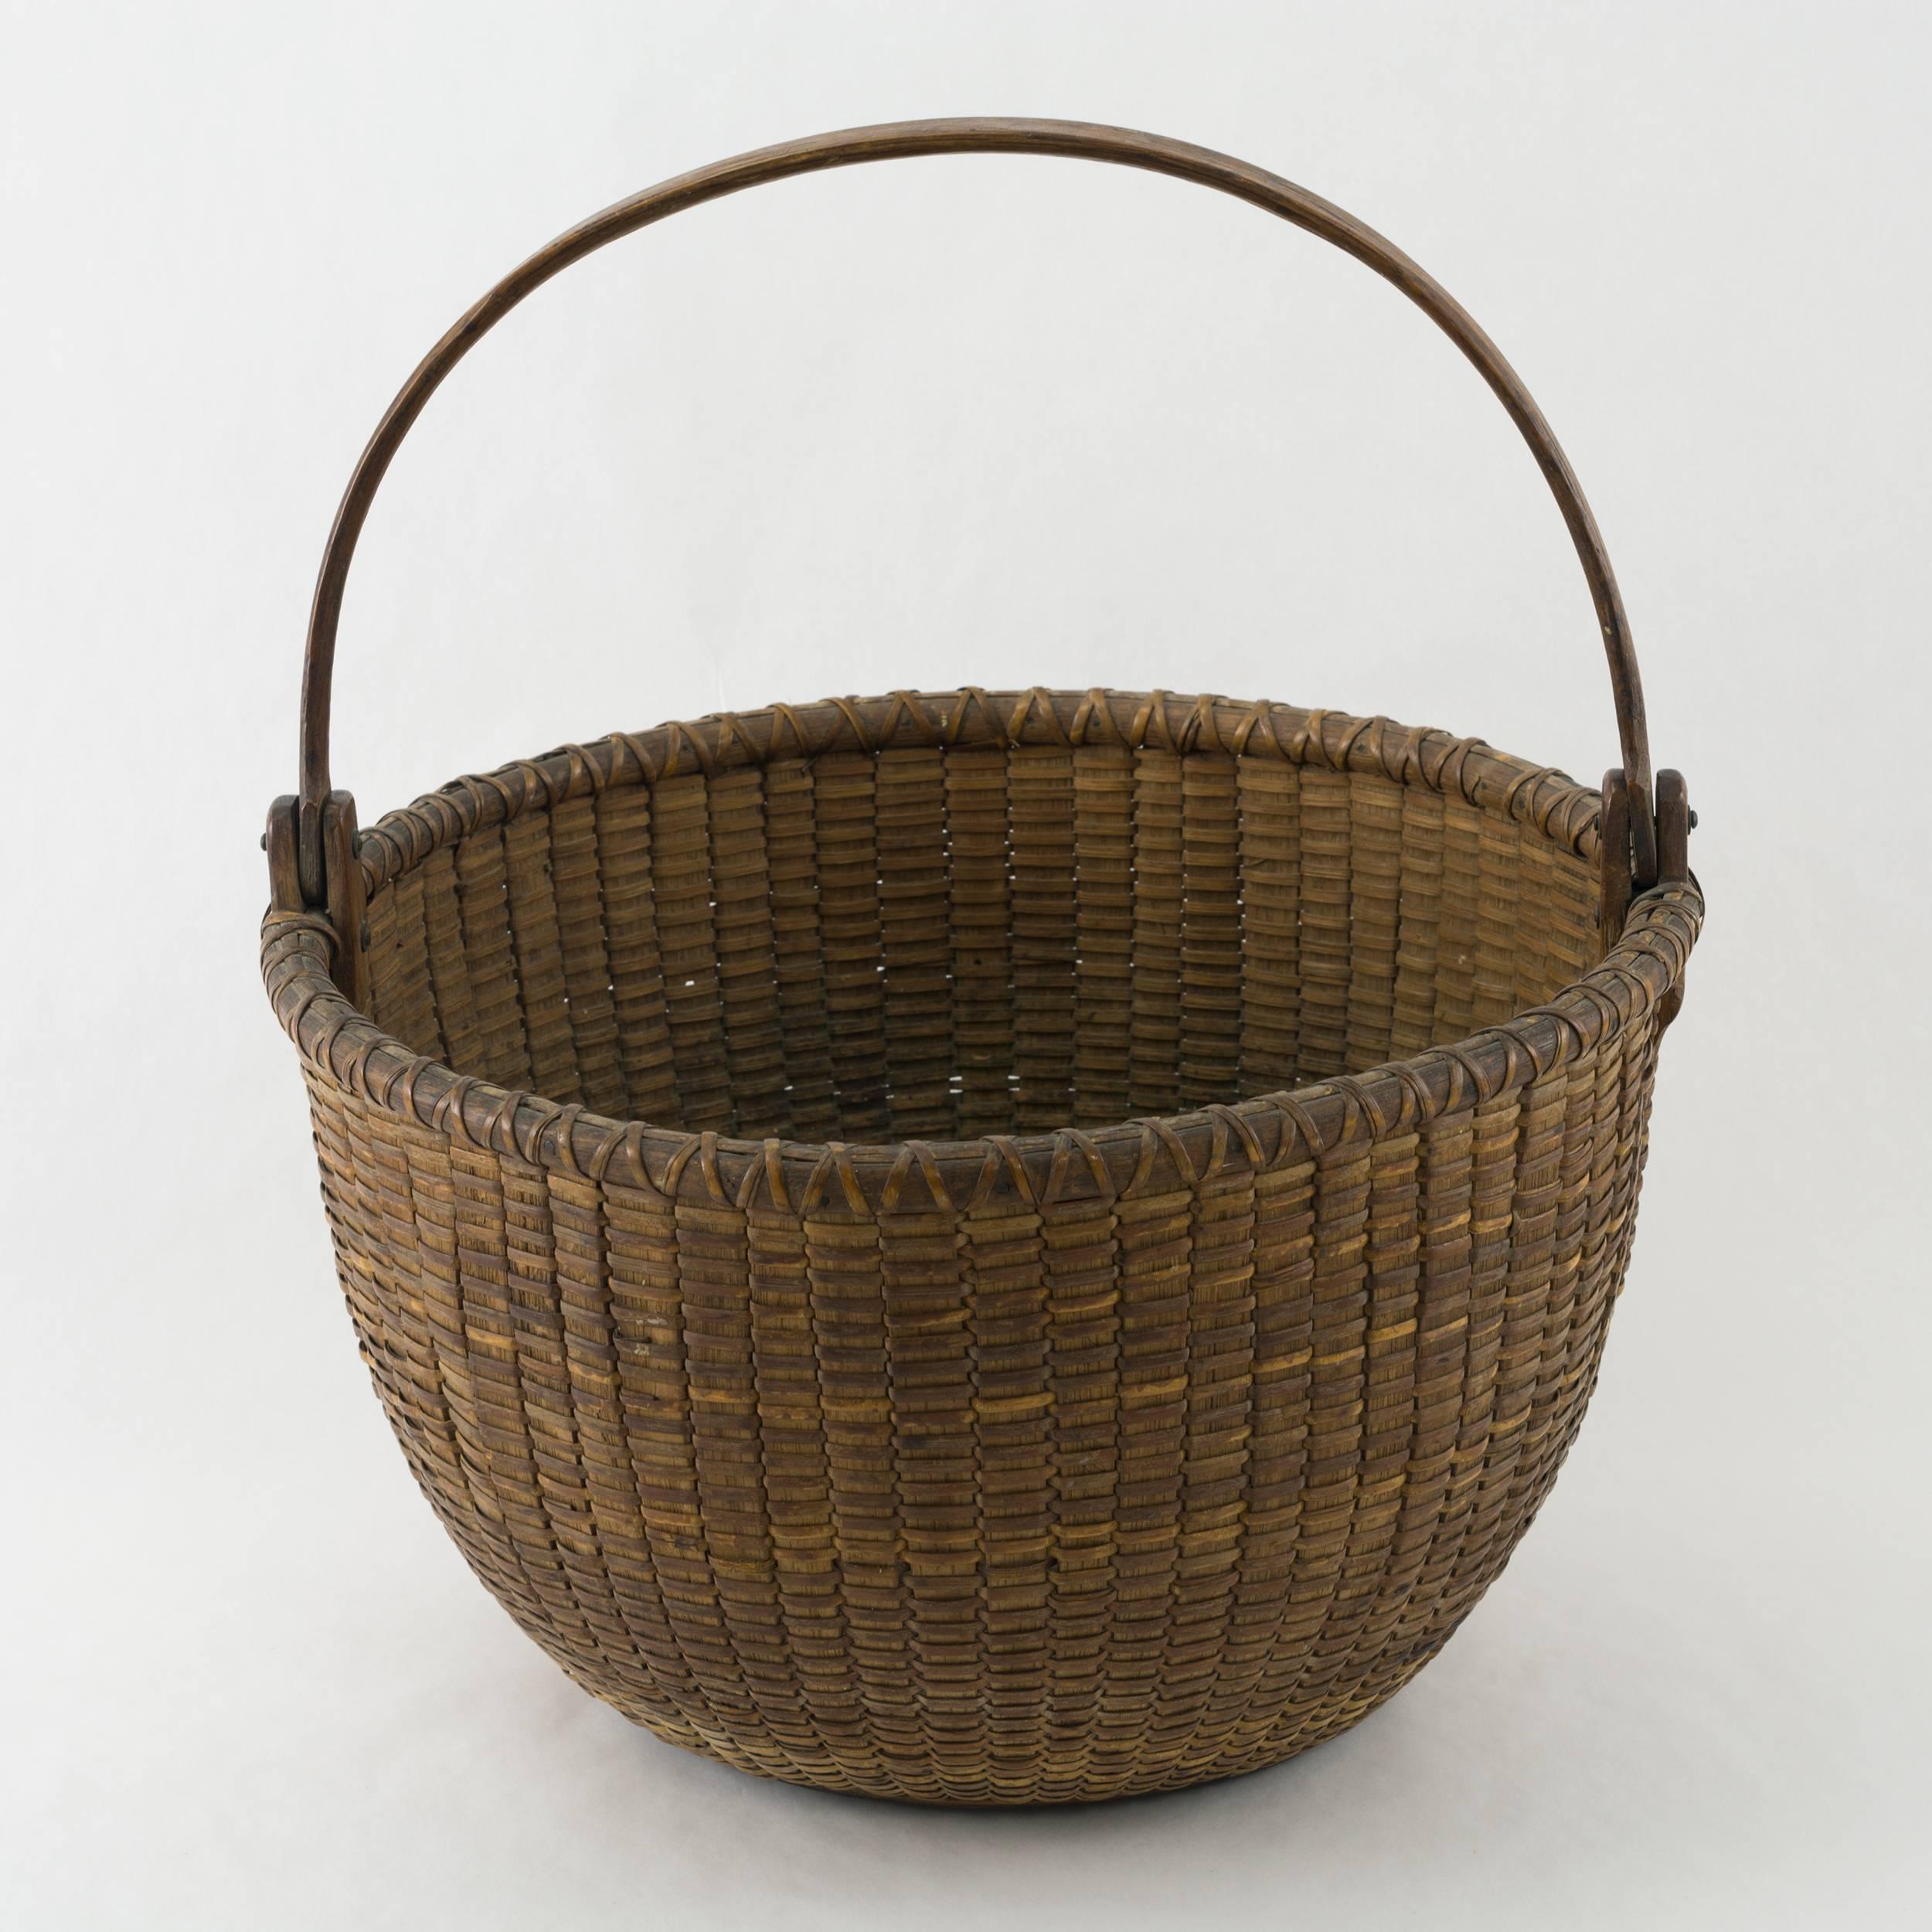 American Open Round Nantucket Lightship Basket Made by Capt. James Wyer